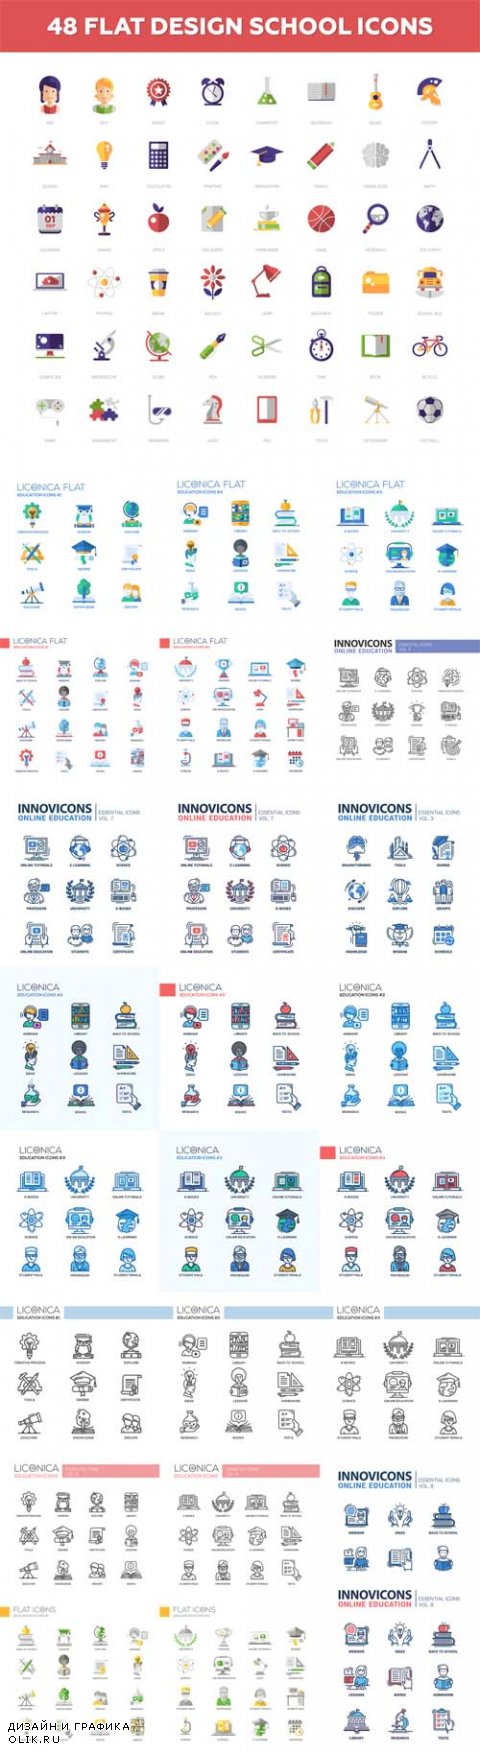 Vector Modern School and Education Design Icons